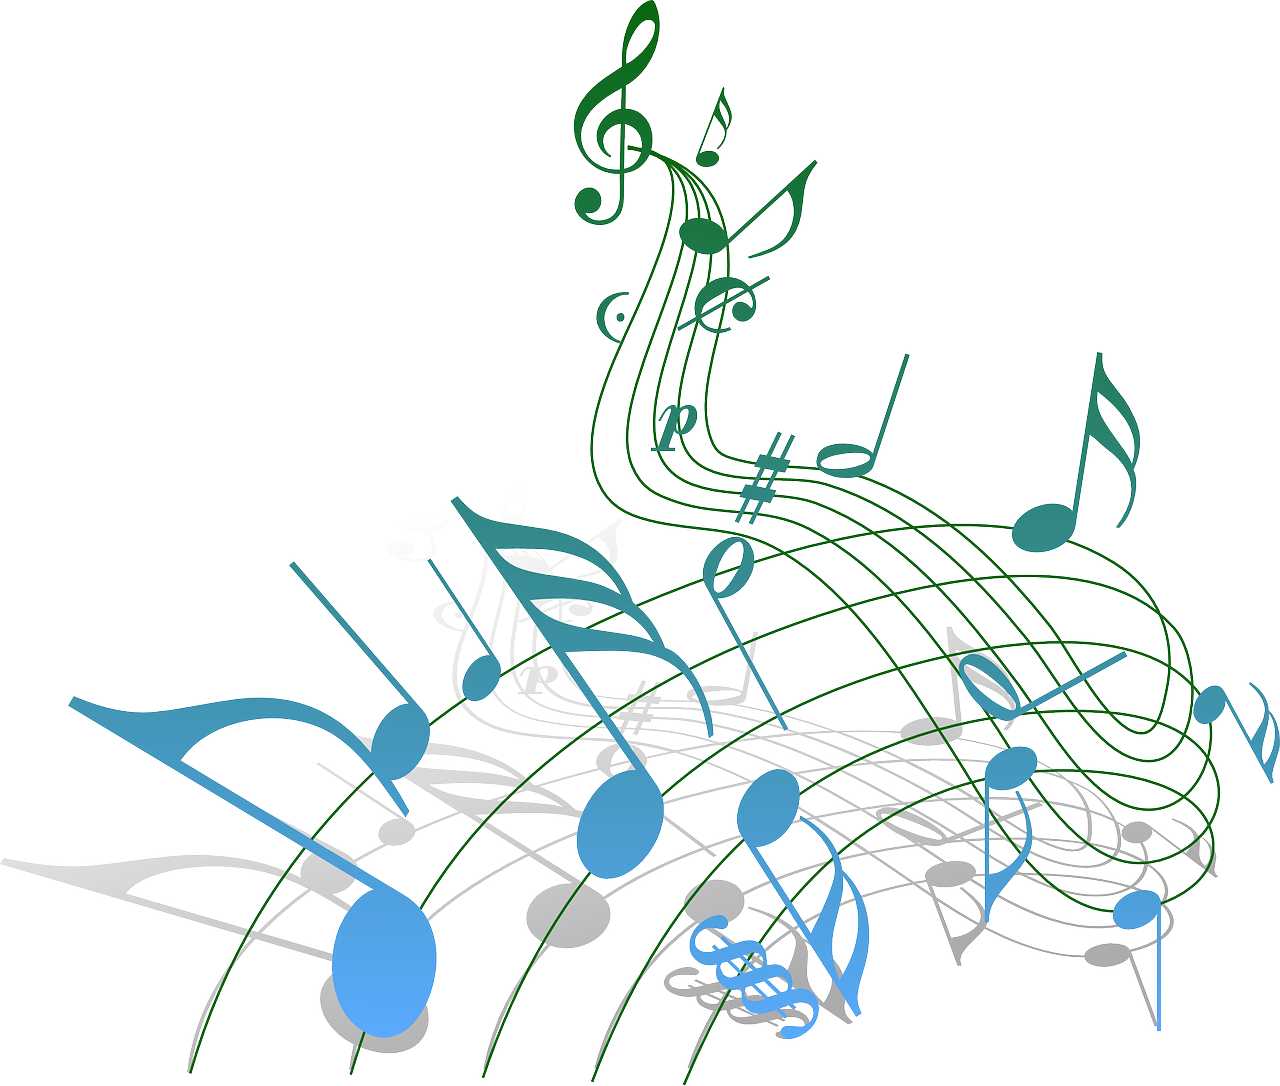 Image of music notes with the illusion of twisting away. Largest music notes are blue, and it transitions to green the smaller and more upward the music notes go.